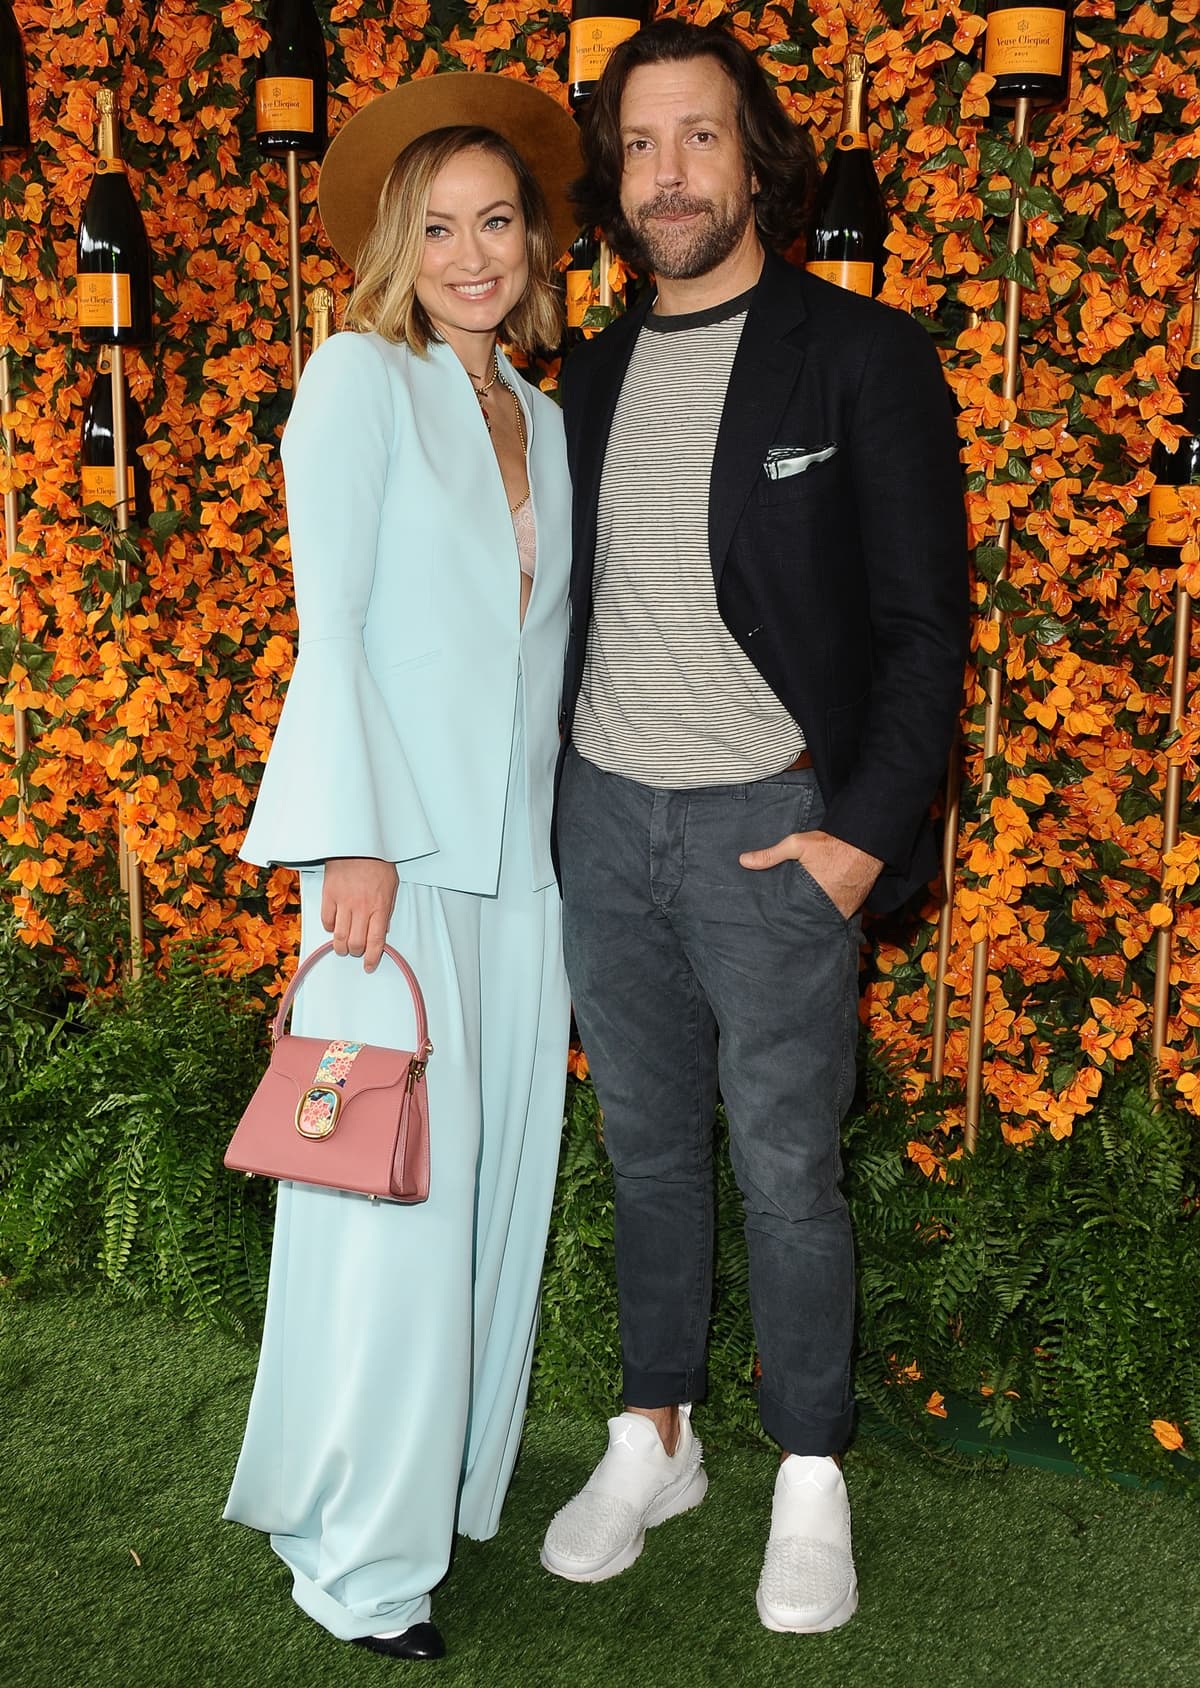 Olivia Wilde, wearing an Alice + Olivia suit with a Lidia May Pema bag and Foundrae jewelry, and Jason Sudeikis arrive at the 9th Annual Veuve Clicquot Polo Classic